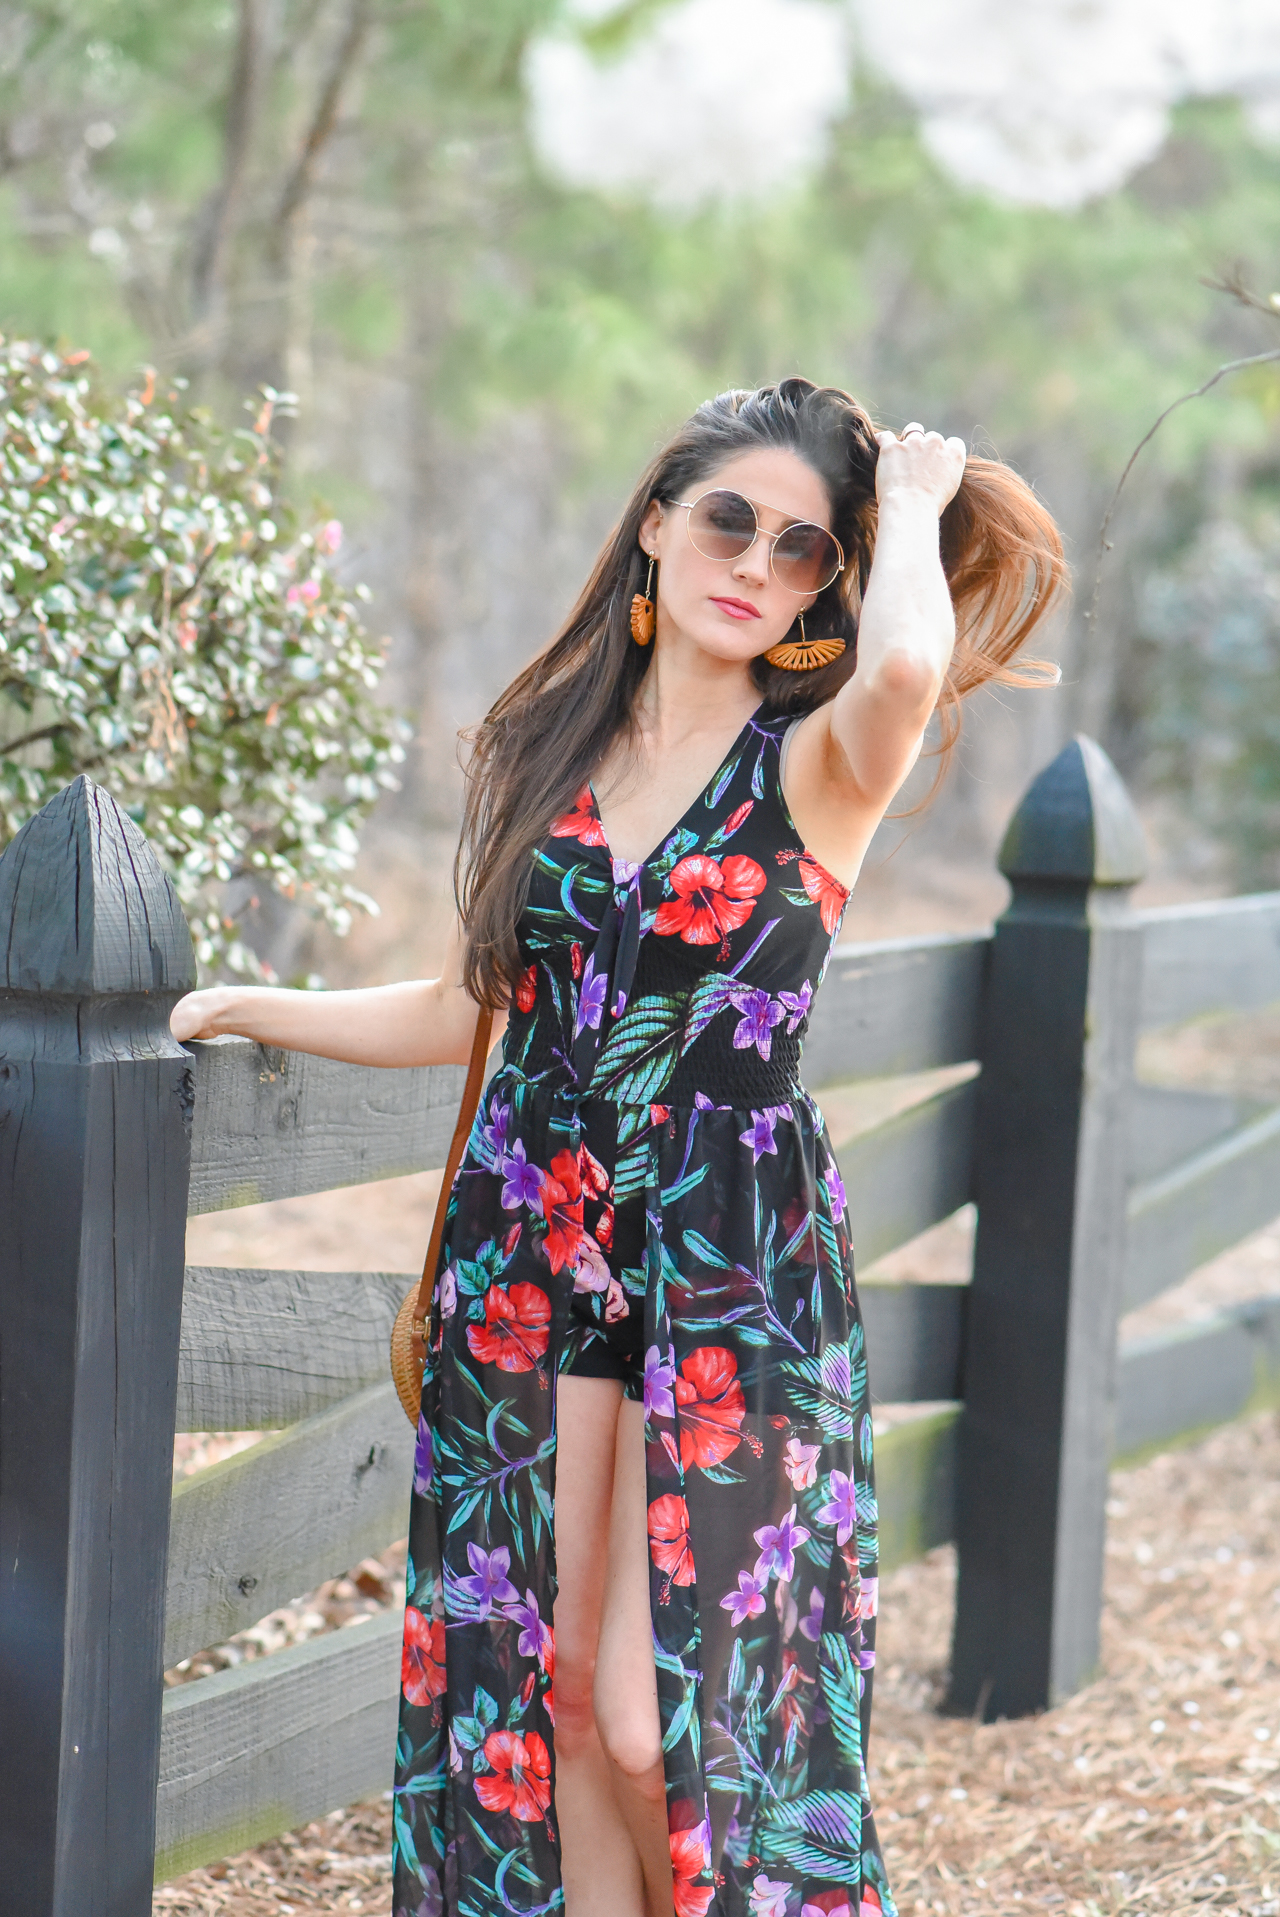 Wal-Mart We Dress America - Floral Maxi Romper and Huarache Sandals by Atlanta Style Blogger Erica Valentin